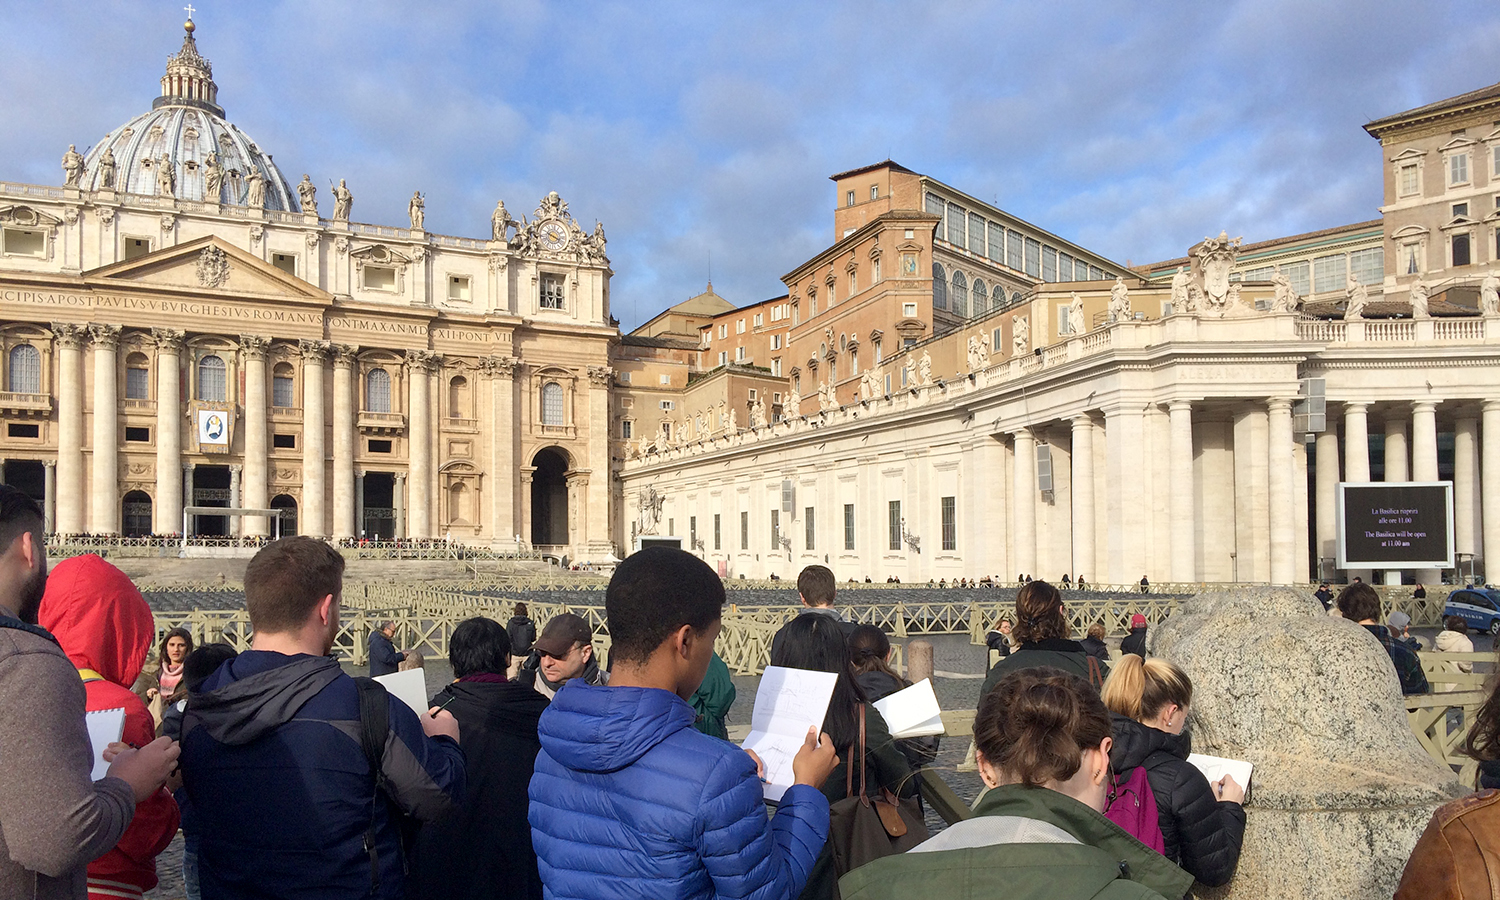 Students sketching abroad in Rome